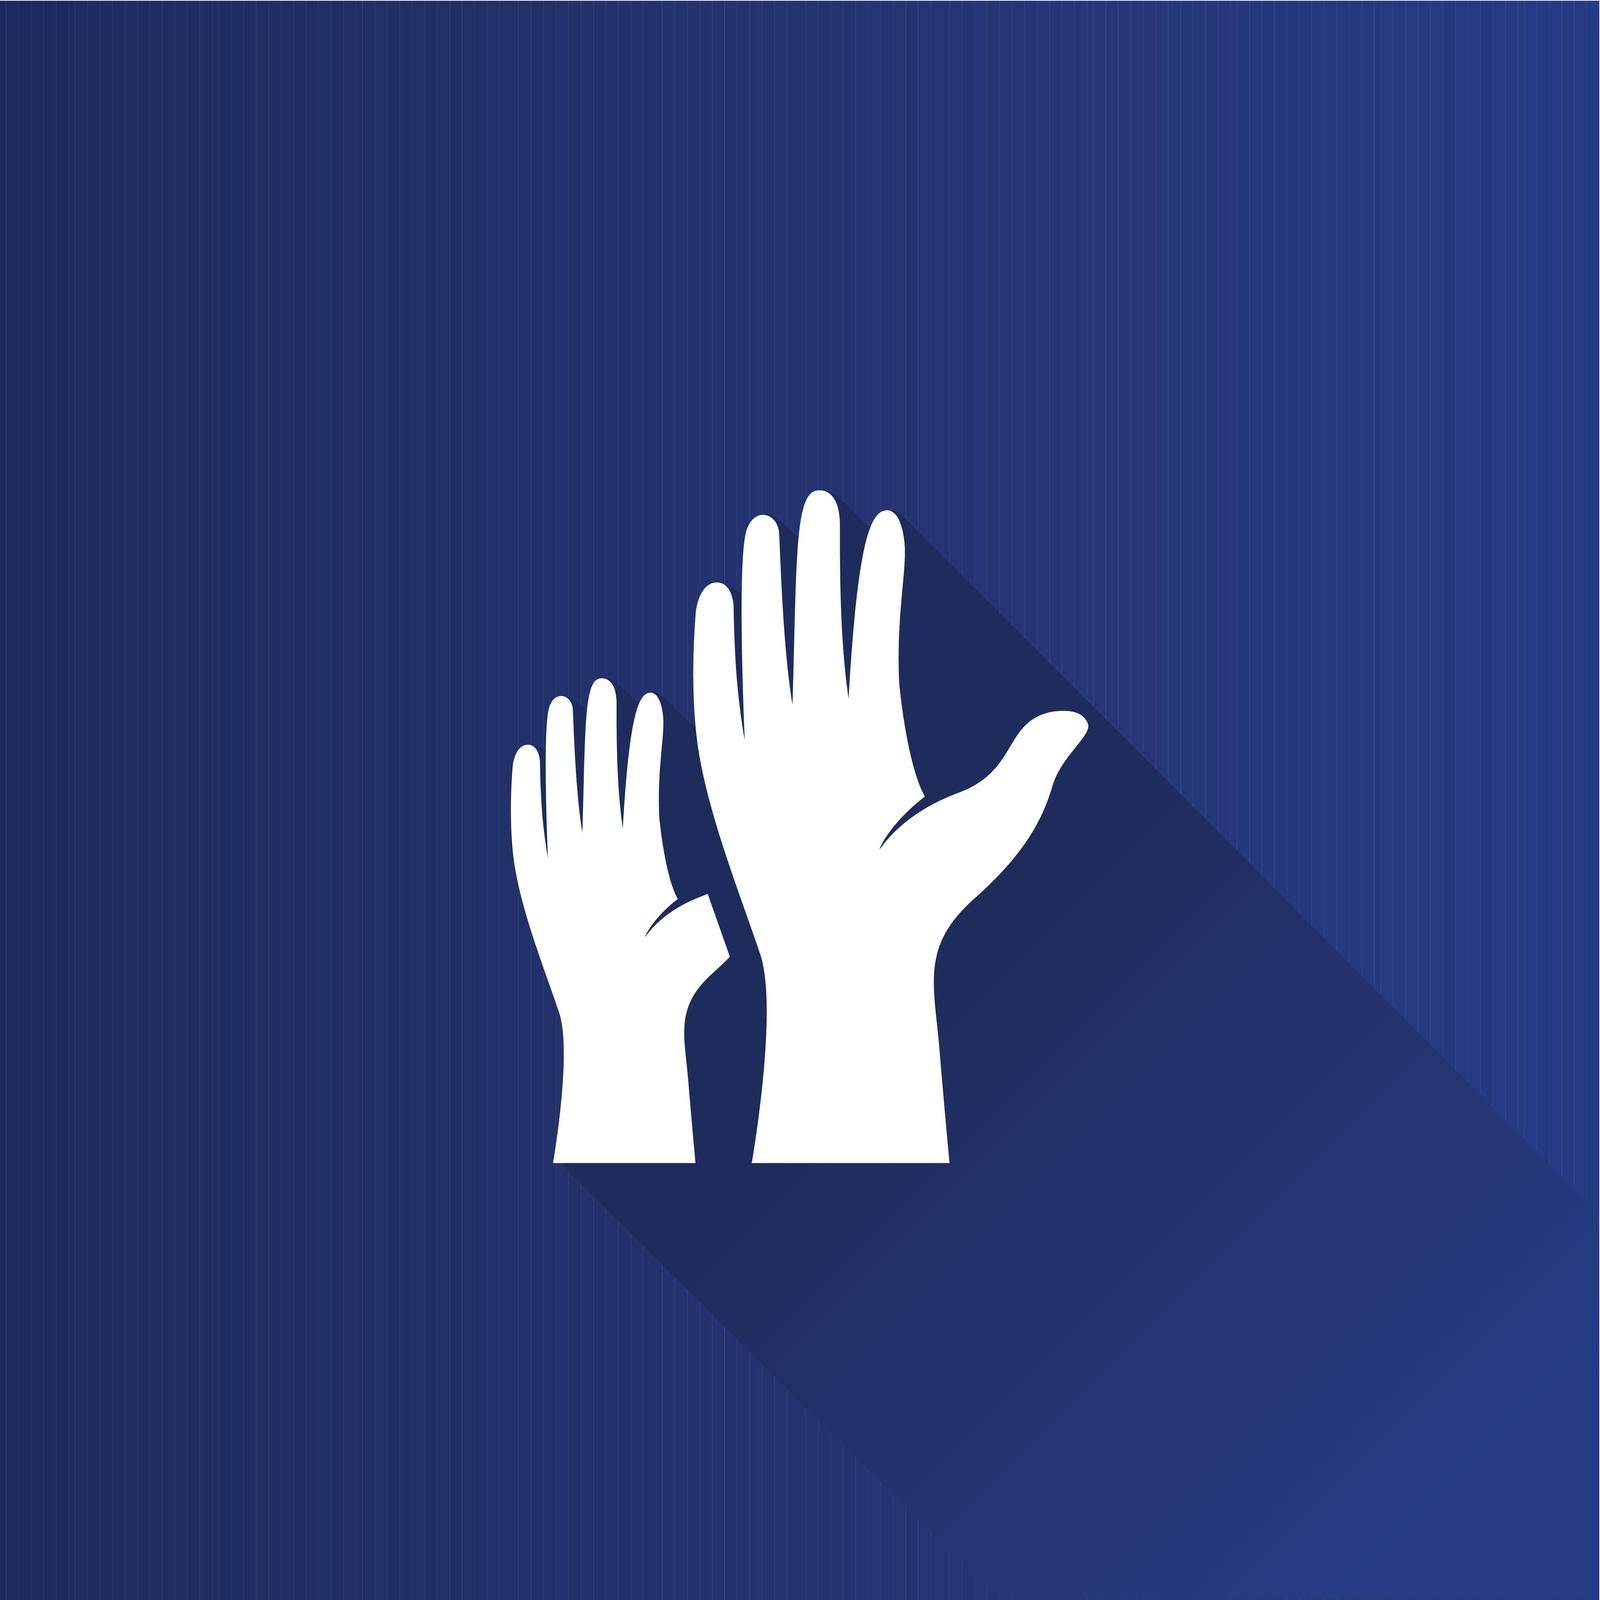 Hands icon in Metro user interface color style. Family care kids parents